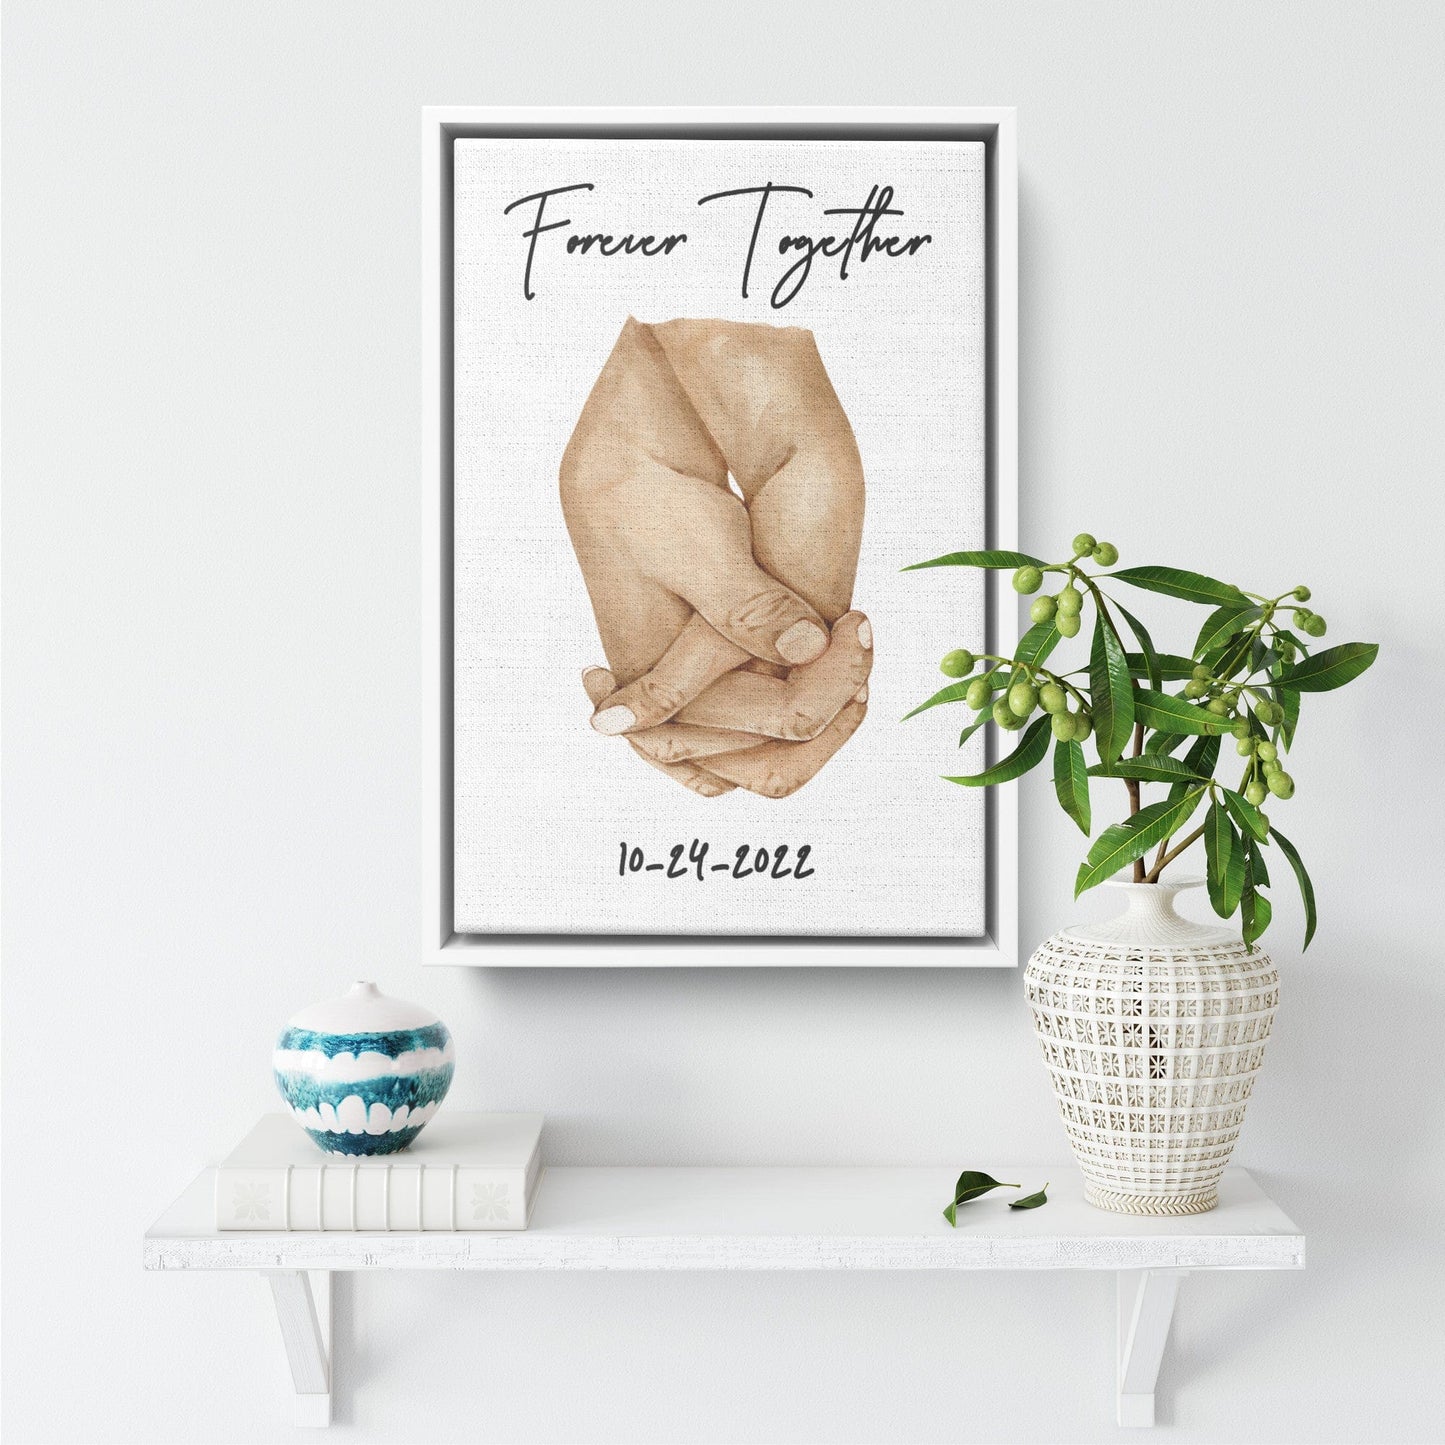 Together Forever Custom Canvas Art, Personalized Gifts